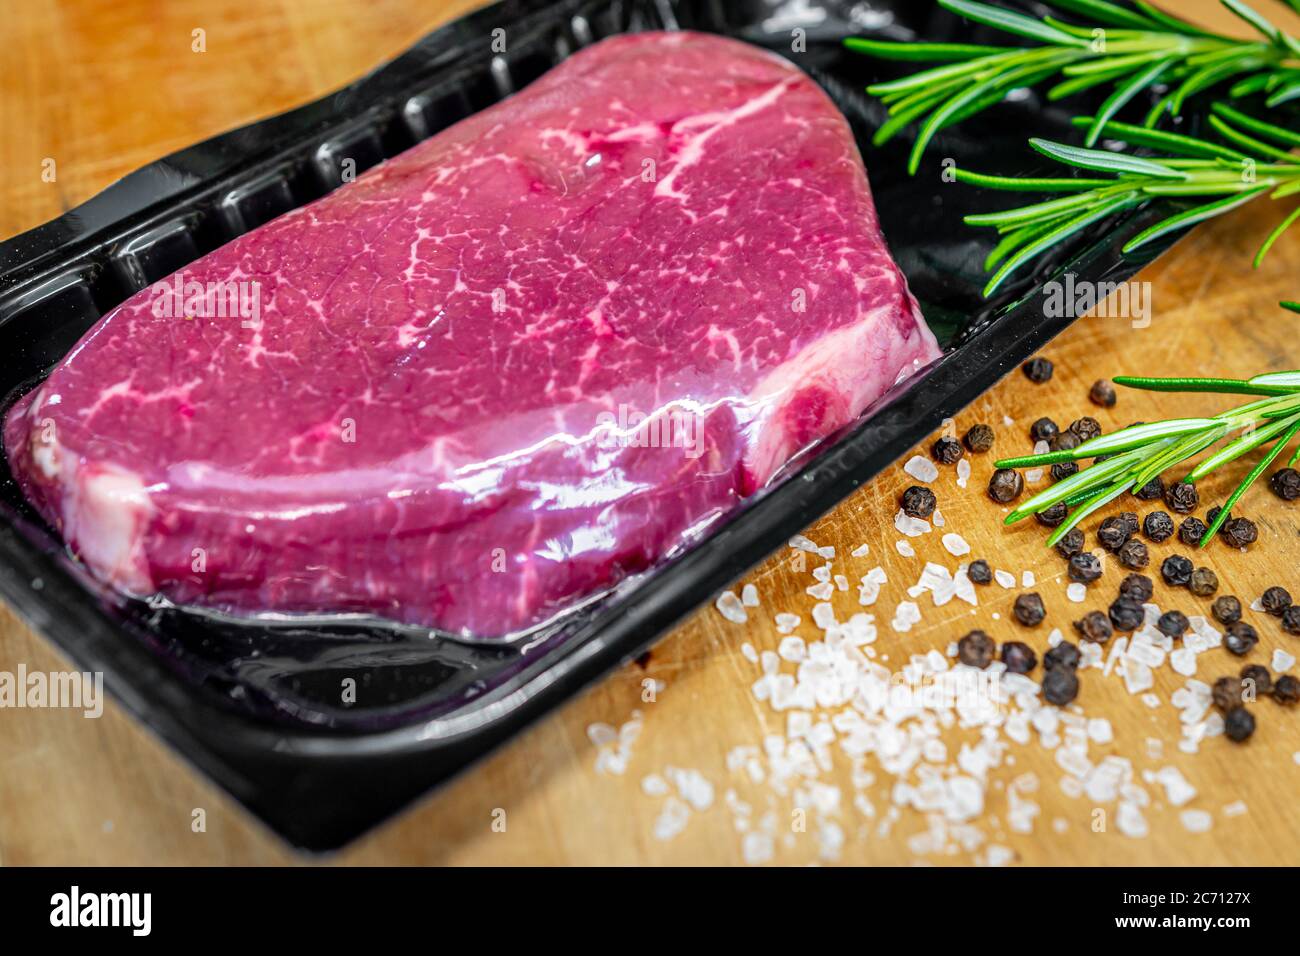 Beef steak in vacuum skin packaging and spices on wooden chopping board Stock Photo